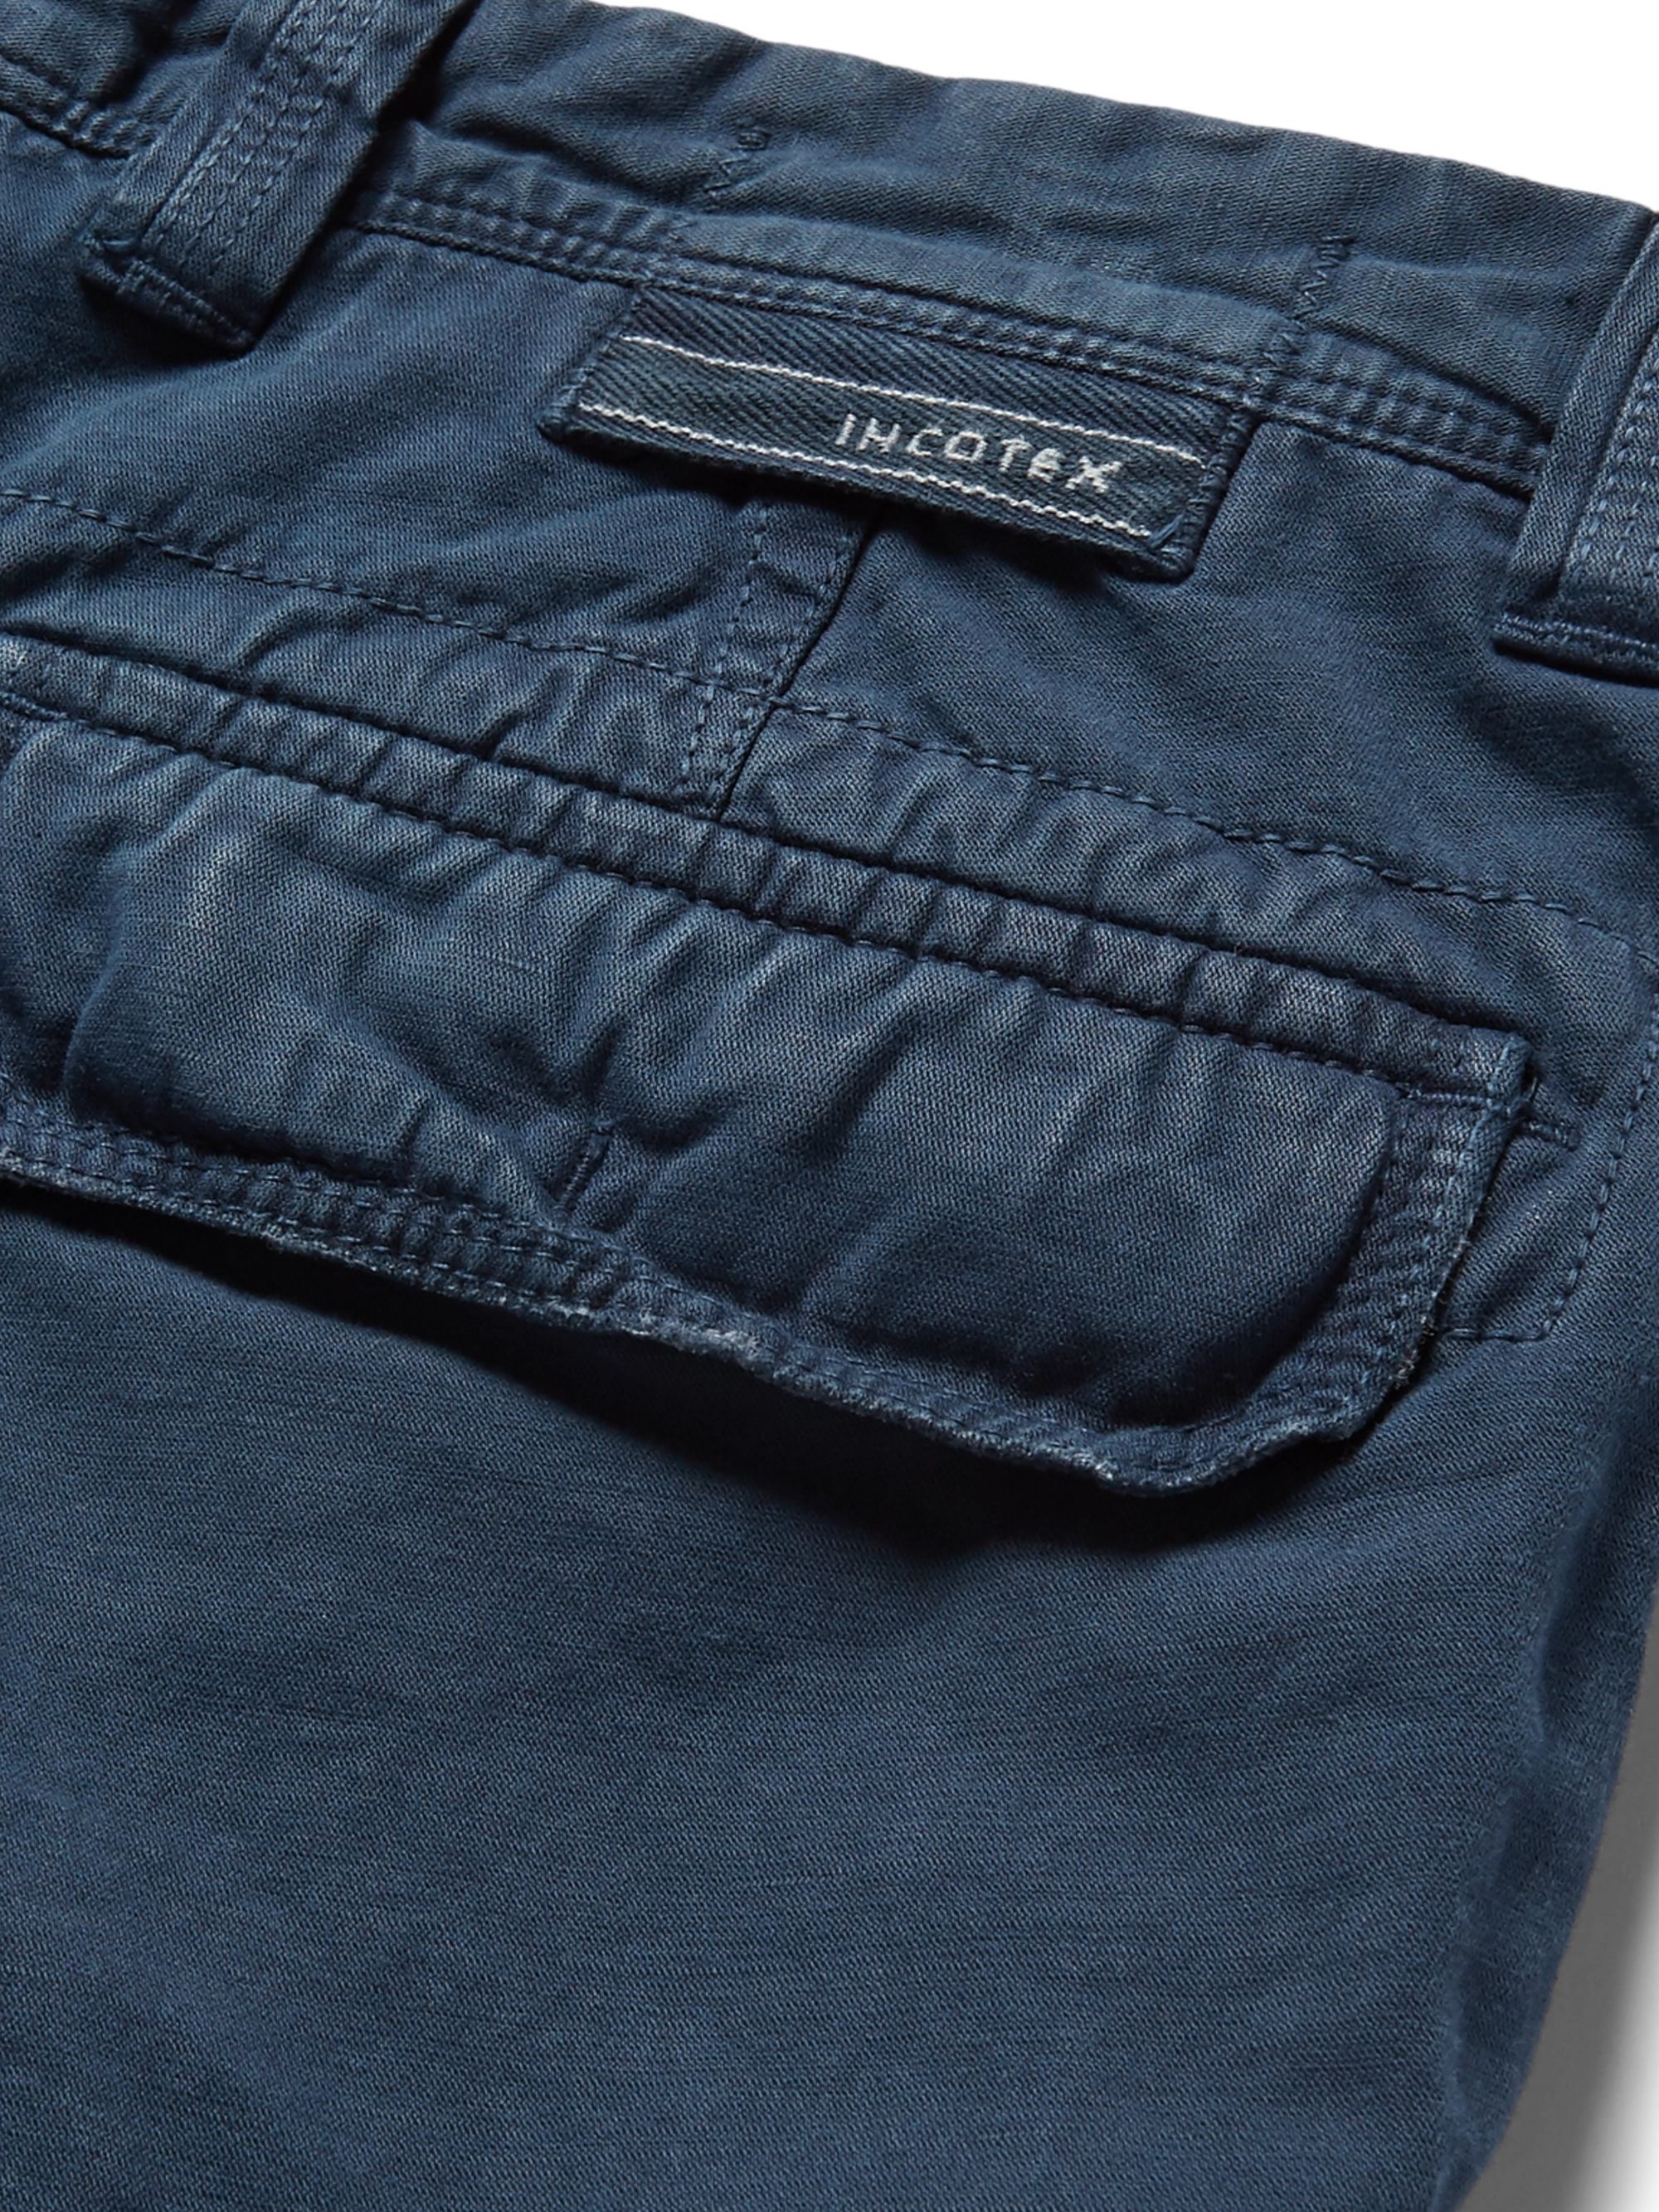 Navy Washed Cotton and Linen-Blend Cargo Shorts | INCOTEX | MR PORTER